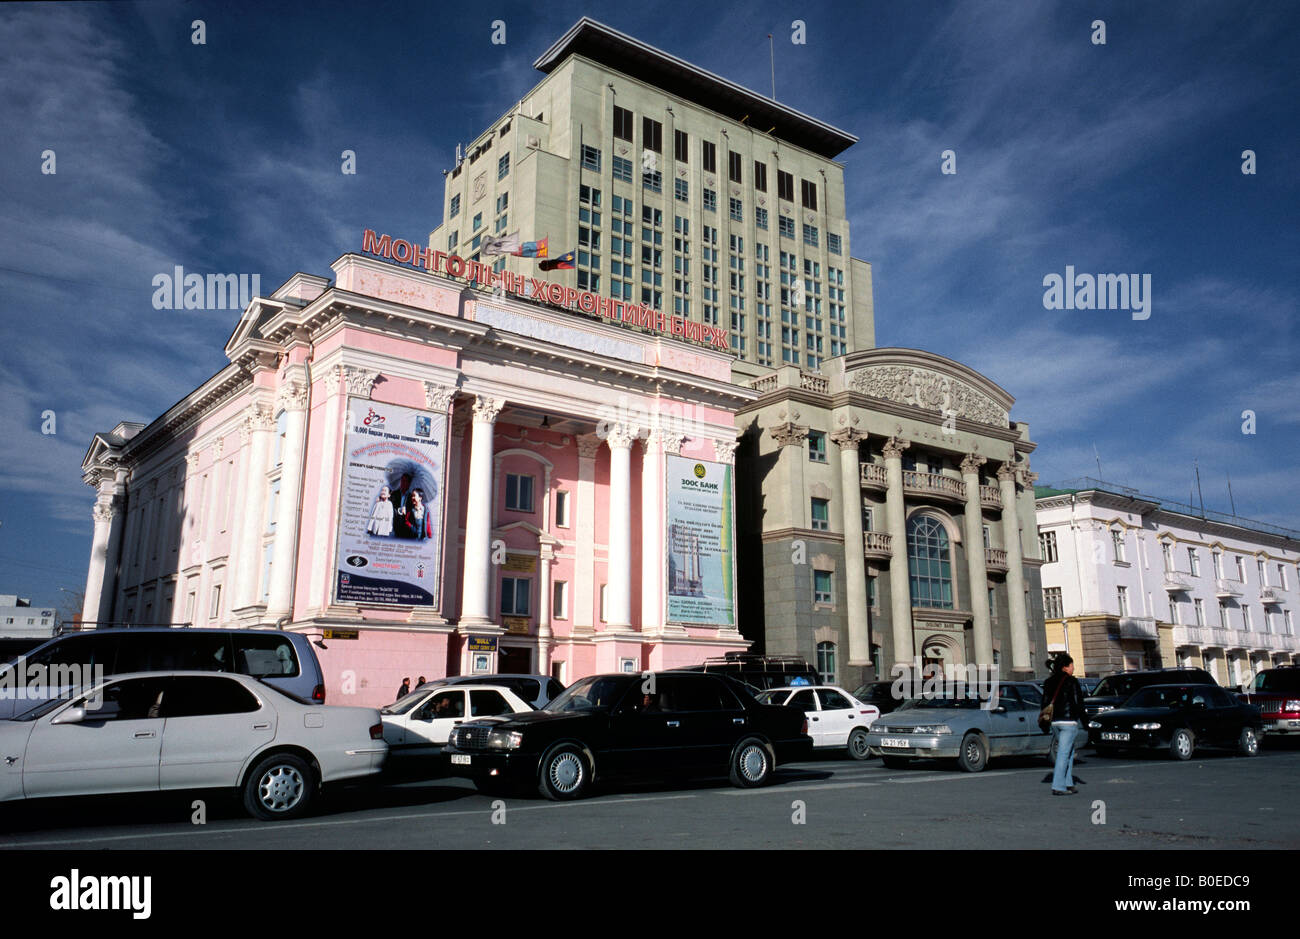 Oct 25, 2006 - Sukhe-Bator Square in the Mongolian capital of Ulaan-Baatar with the headquarters of ZOOS and Golomt Bank. Stock Photo